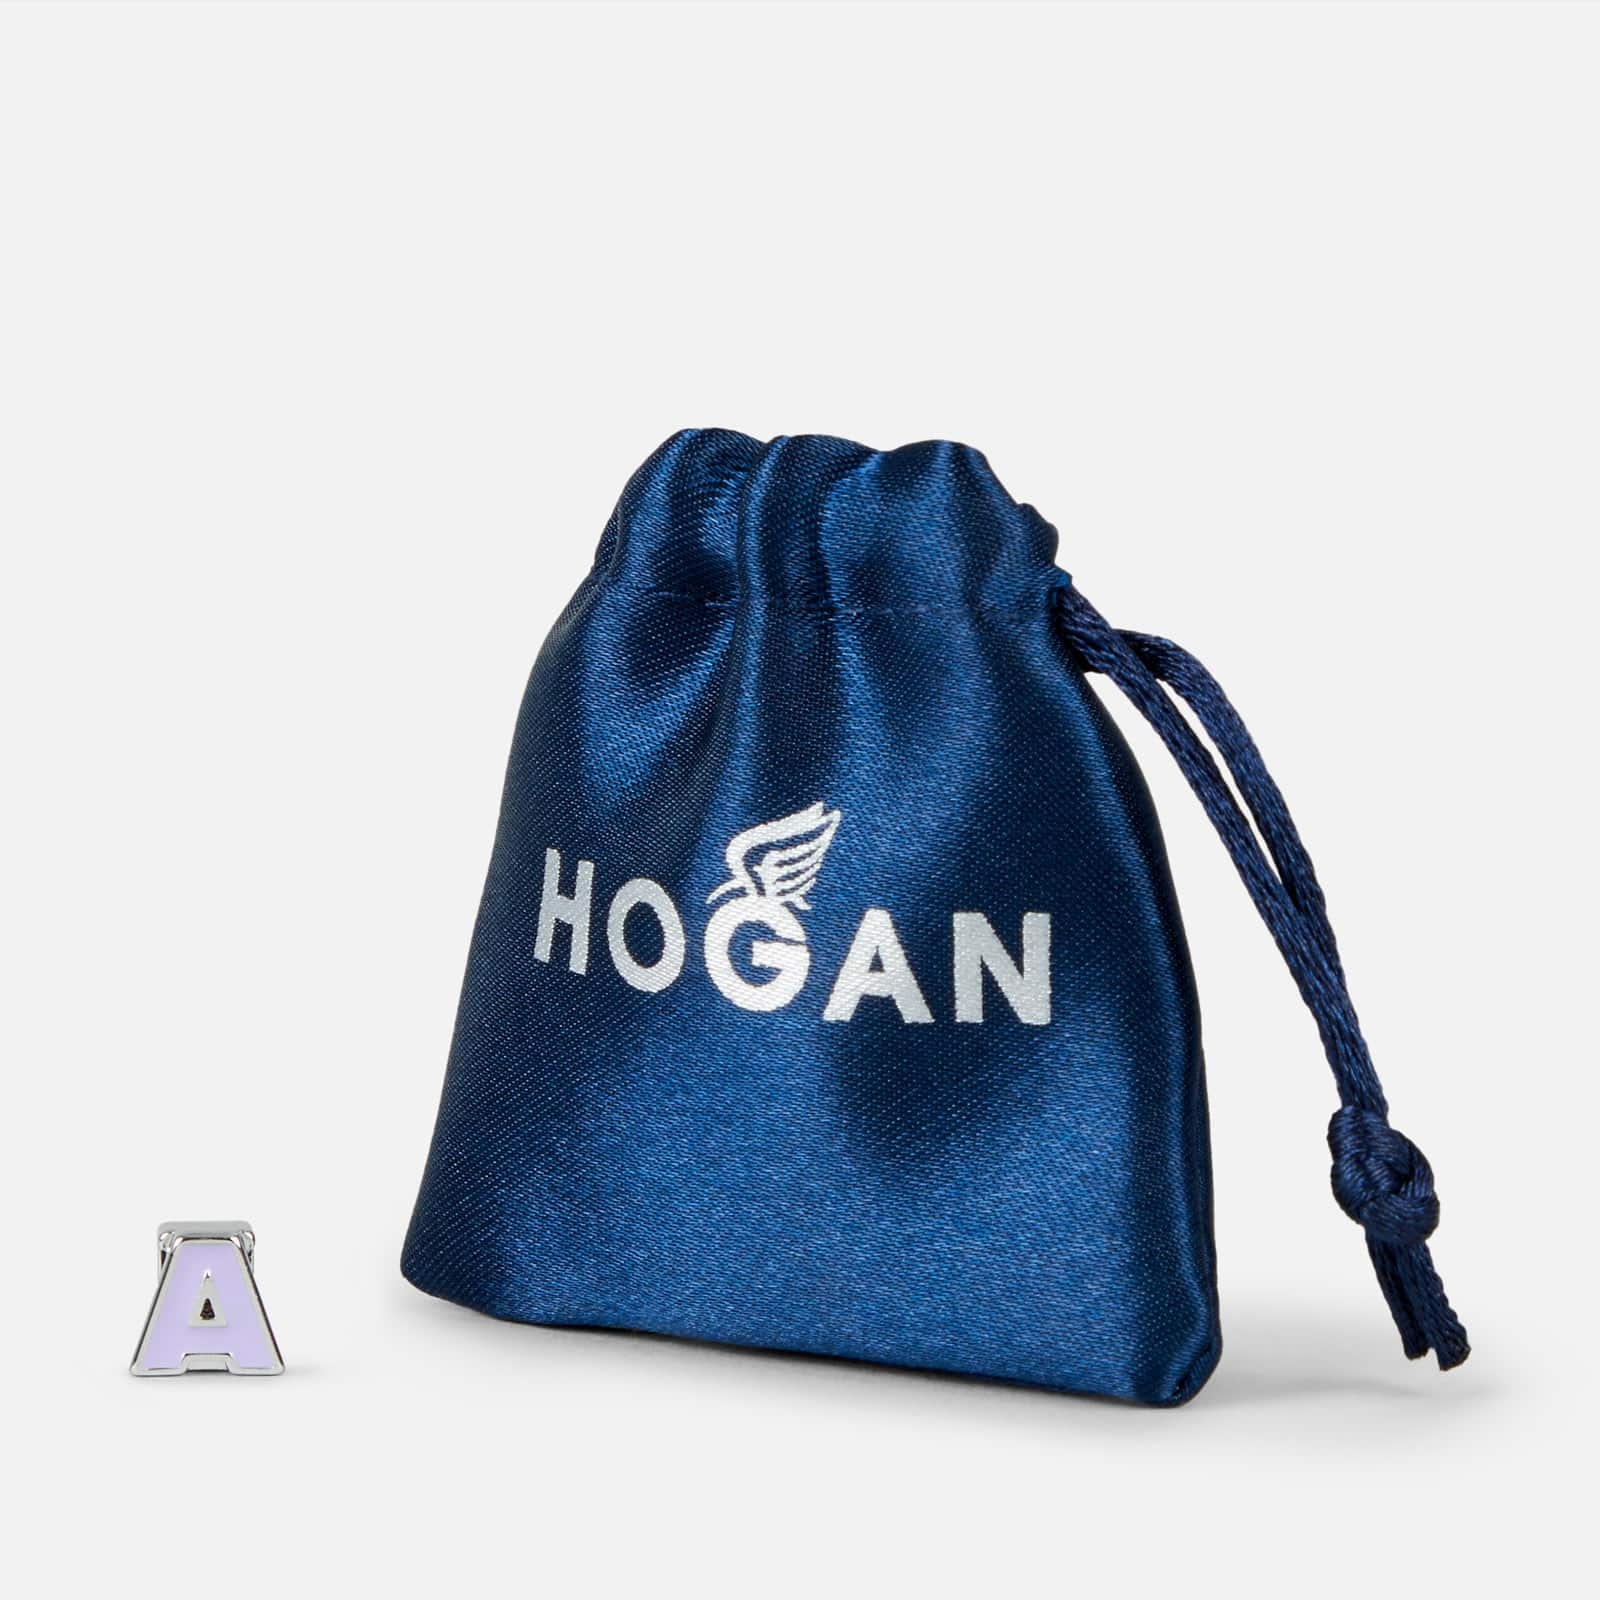 Hogan By You - Shoelace Bead Gold Violet Yellow - 2